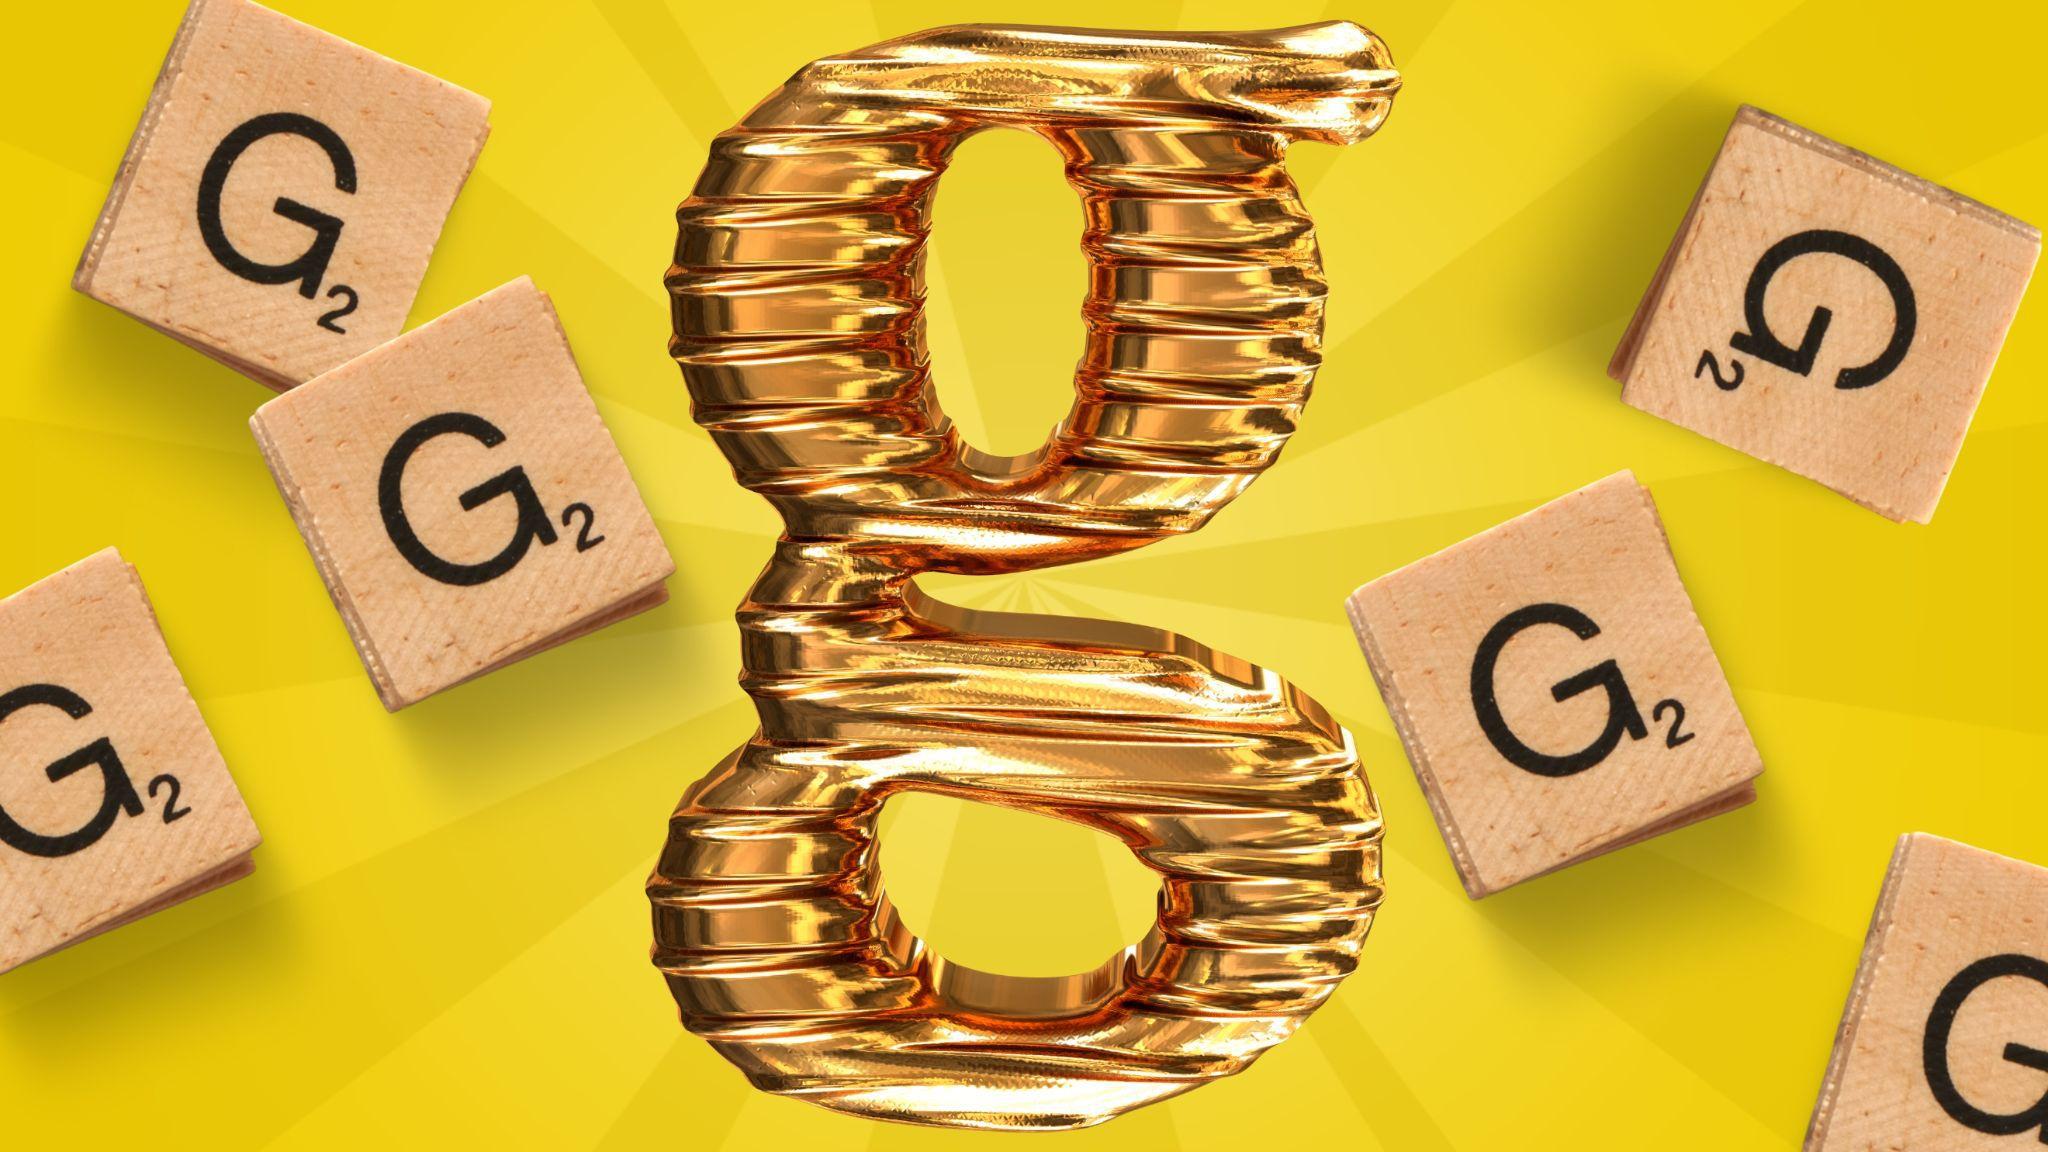 A golden foil “g” sits on top of a yellow background, surrounded by Scrabble pieces.